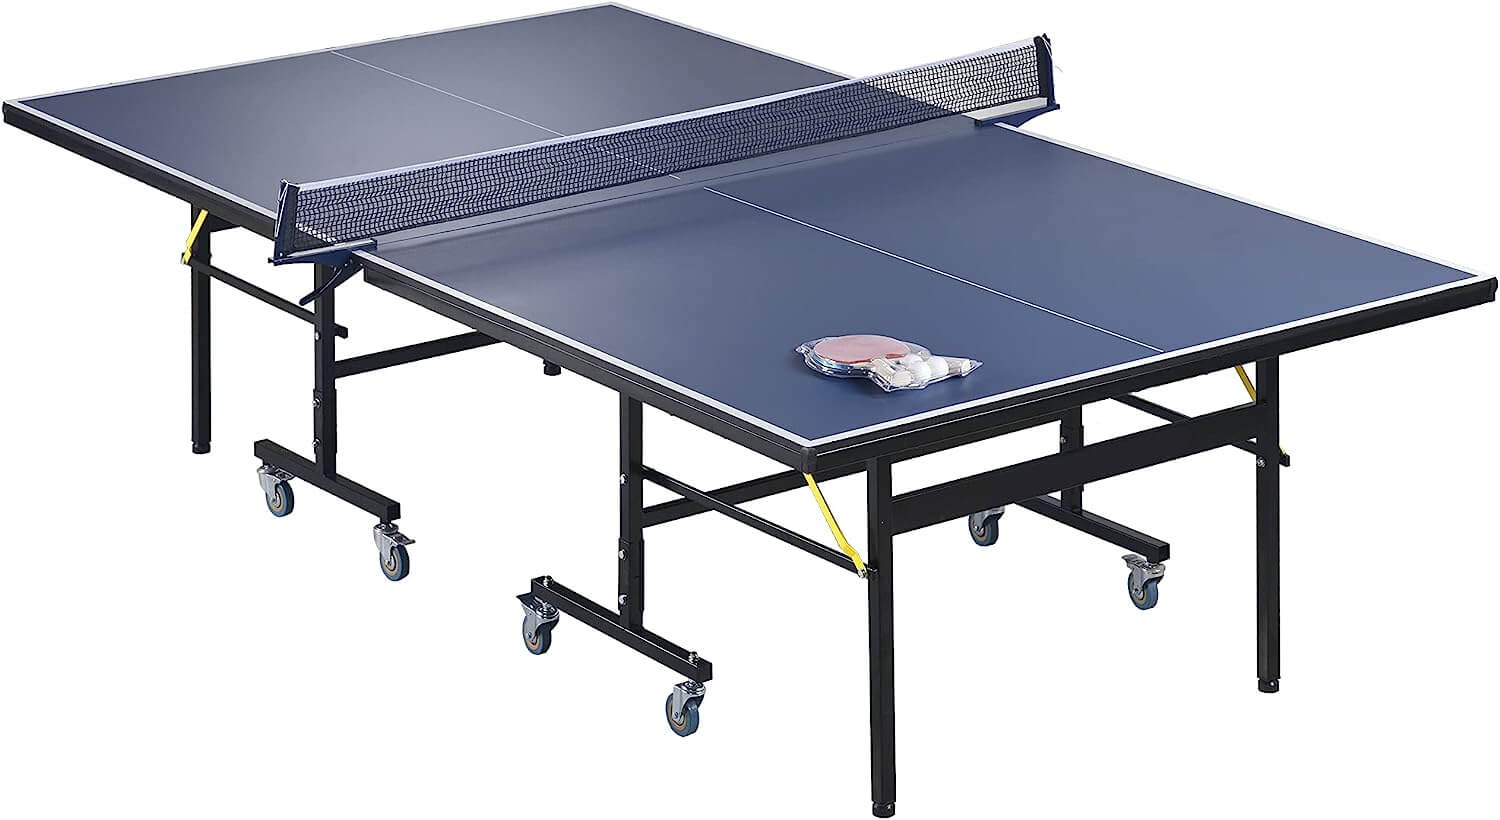 Merax.-Everest-Series-Foldable-Table-Tennis-Table-Review